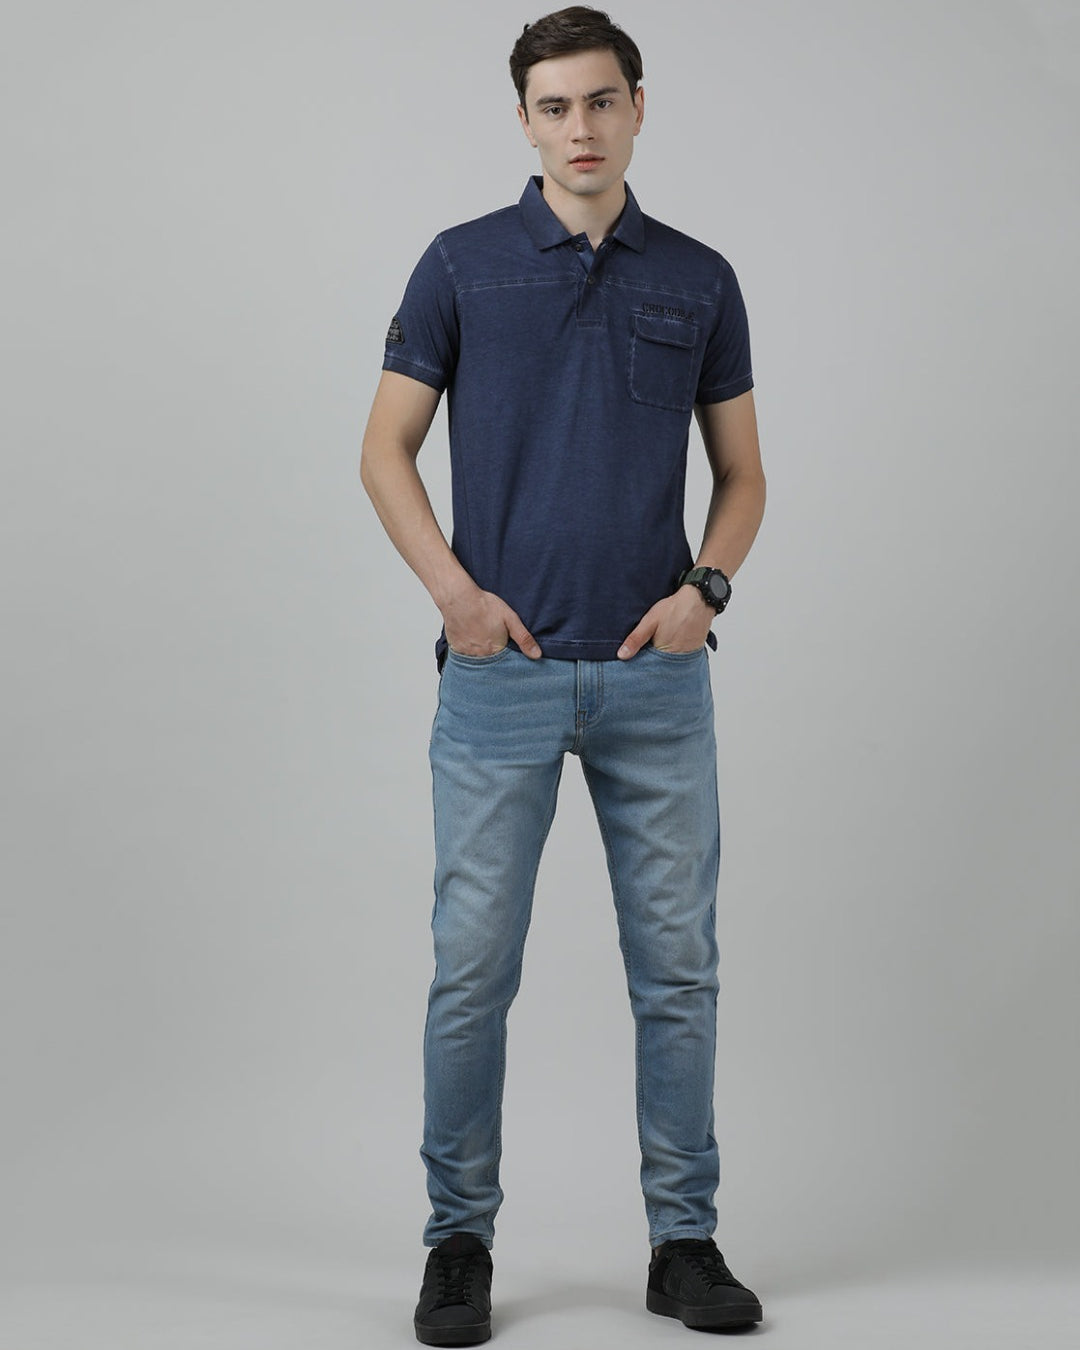 Crocodile Casual Blue T-Shirt Half Sleeve Slim Fit with Collar for Men